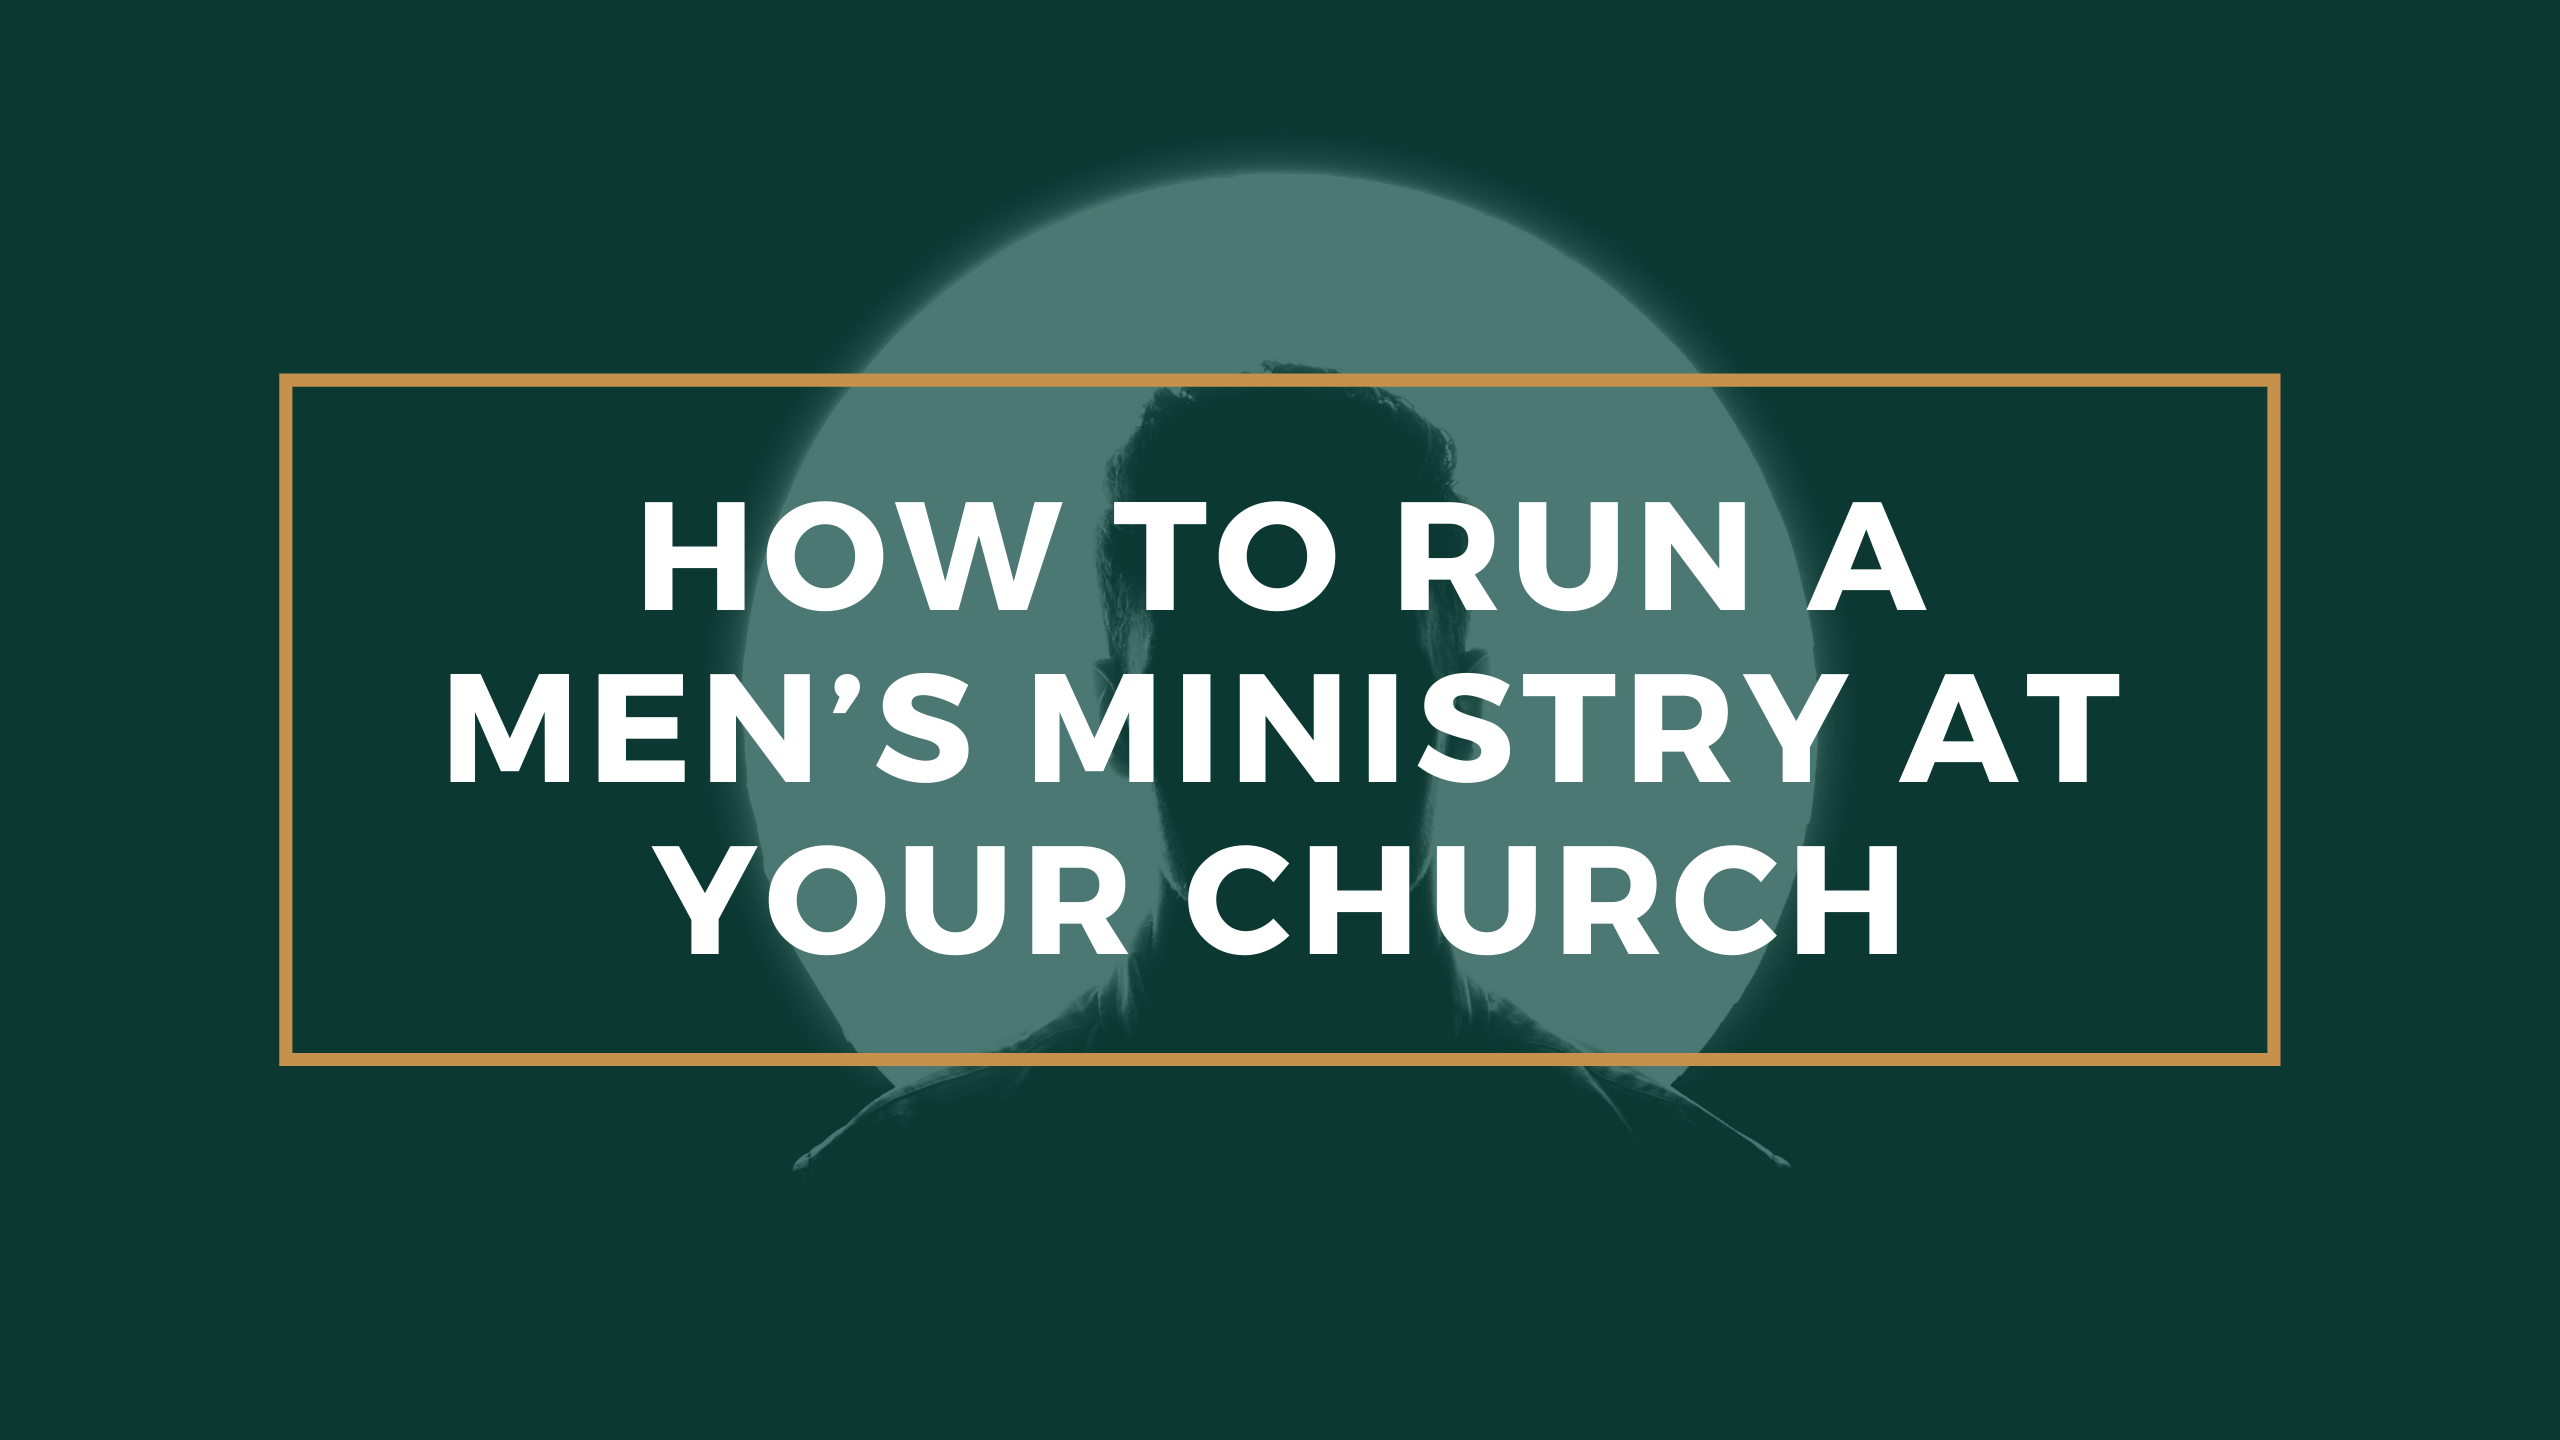 how-to-run-a-mens-ministry-at-your-church_the-malphurs-group